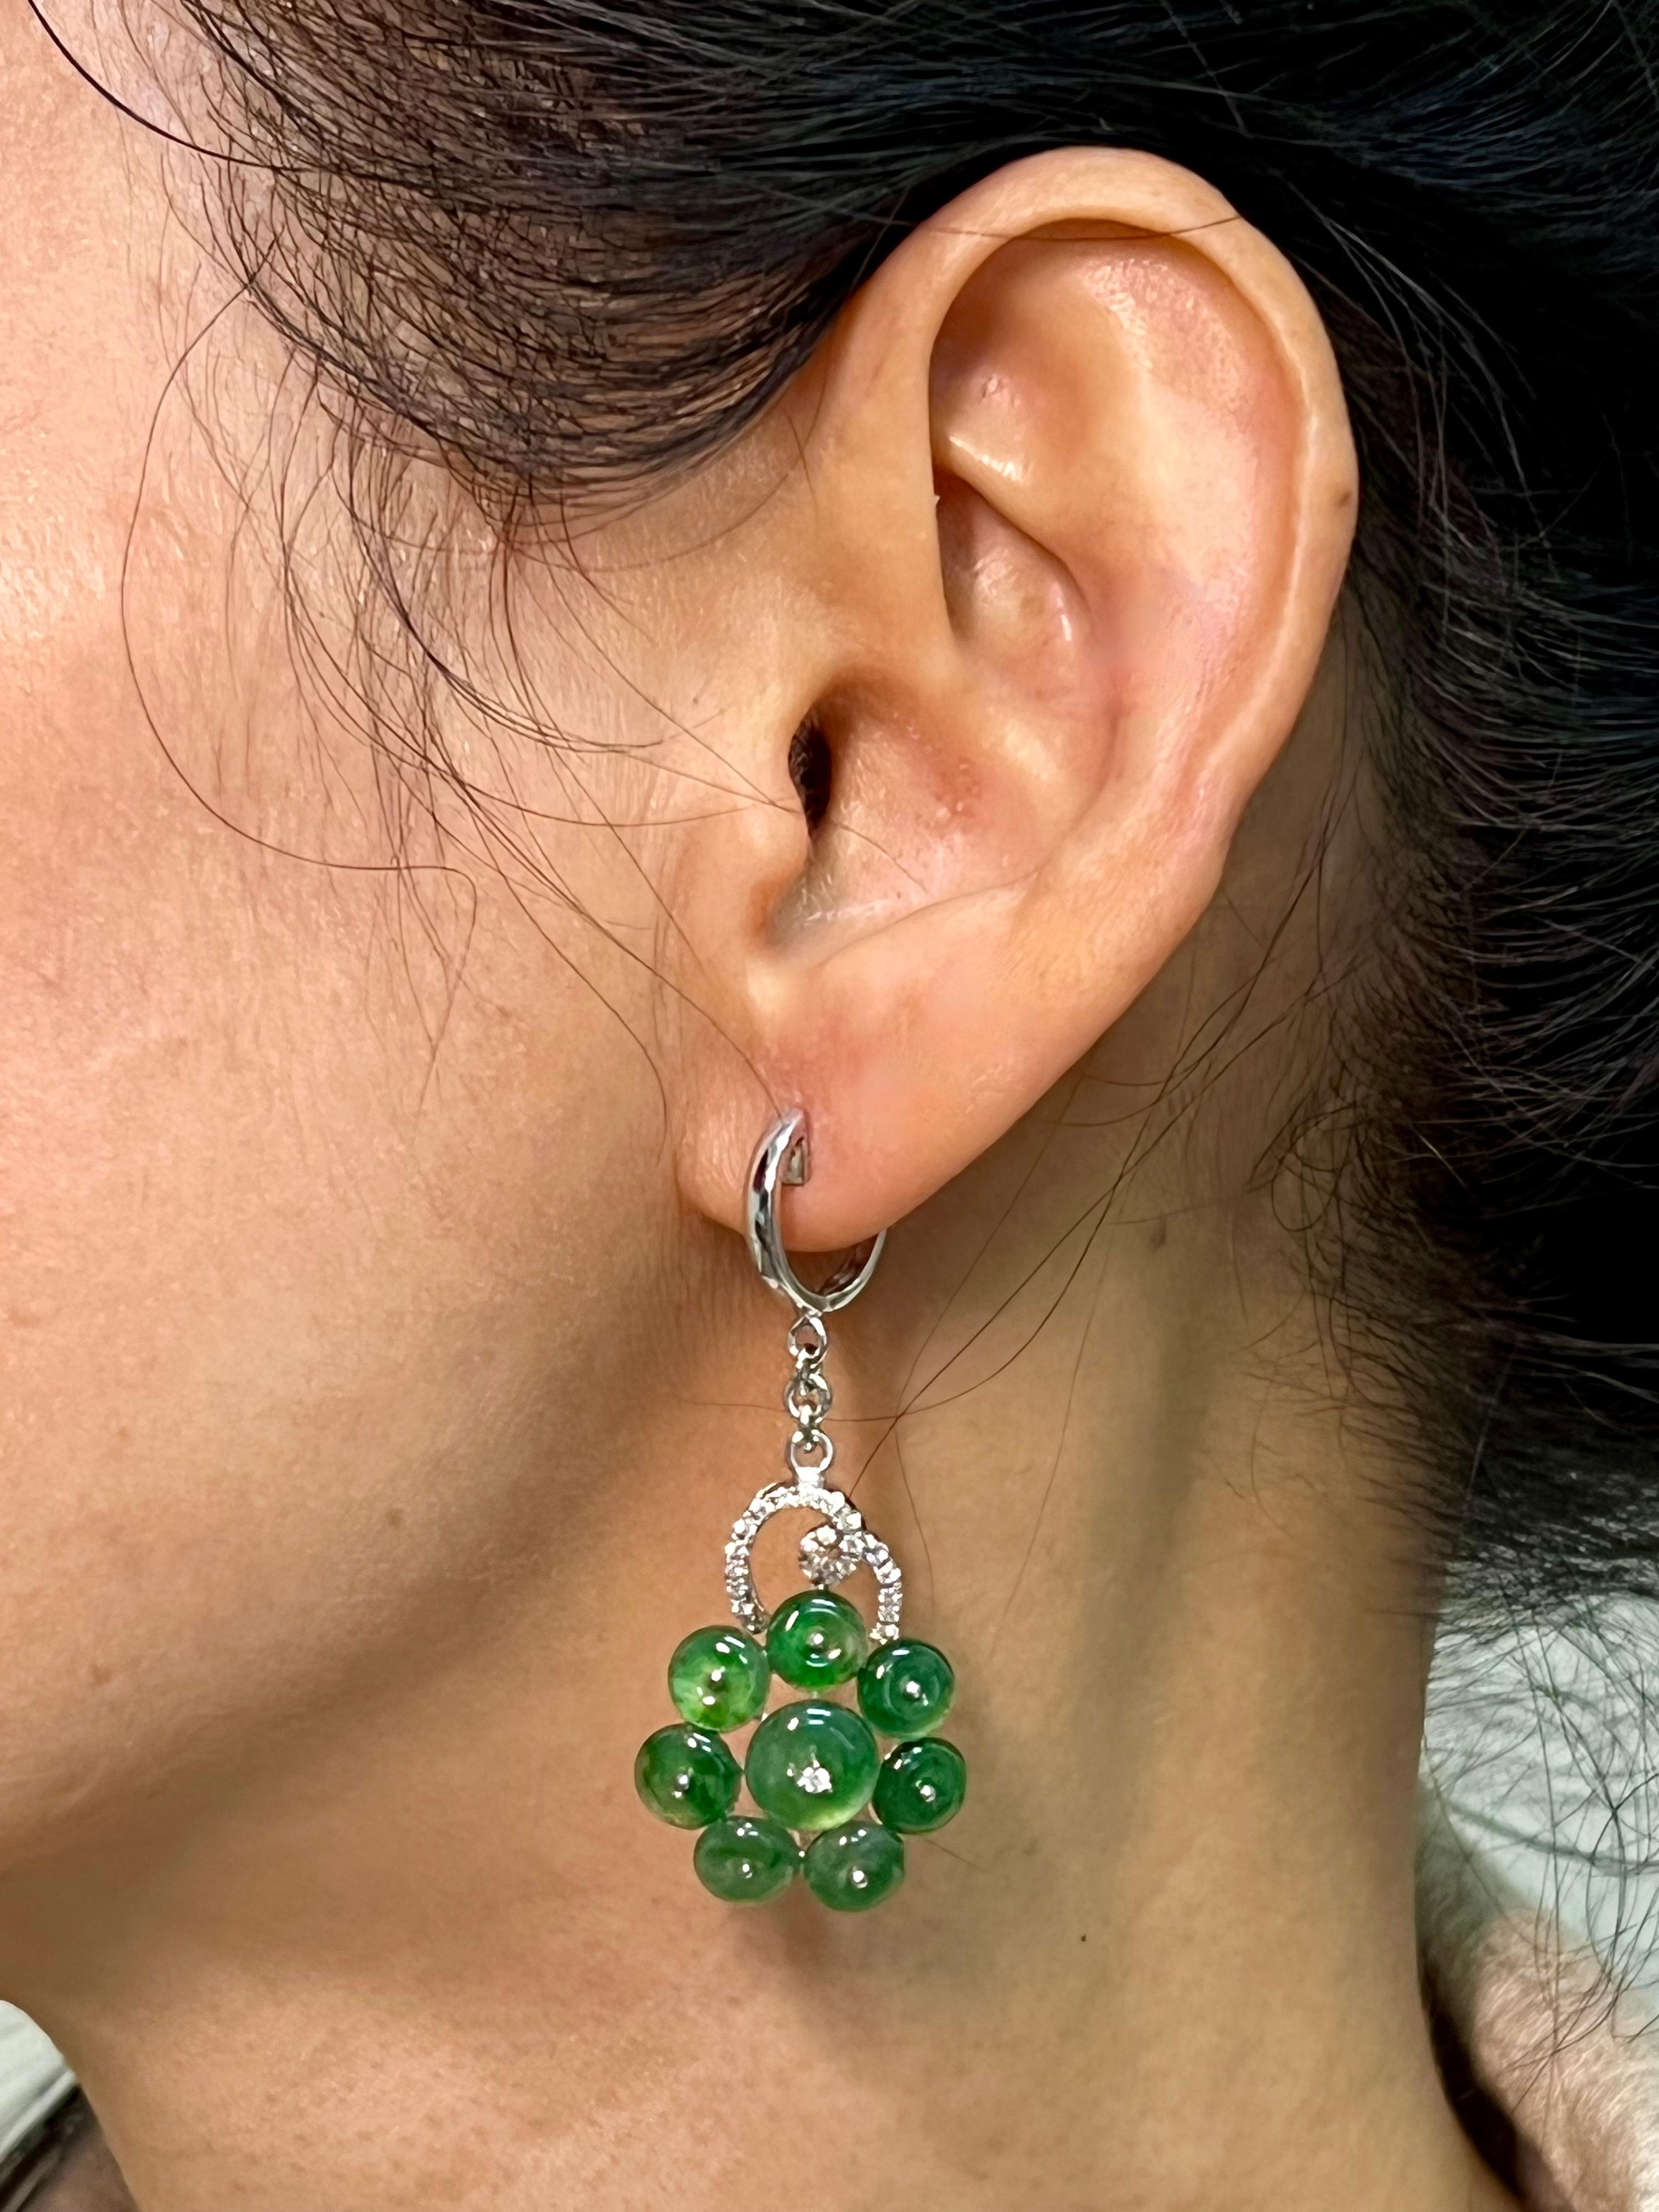 Please check out the HD video! Here is a nice pair of cluster Jade flower earrings. The diameter of the jade part of the earrings are about 19mm each. The total length of each earring is about 4.7cm. The earrings are set in 18k white gold and